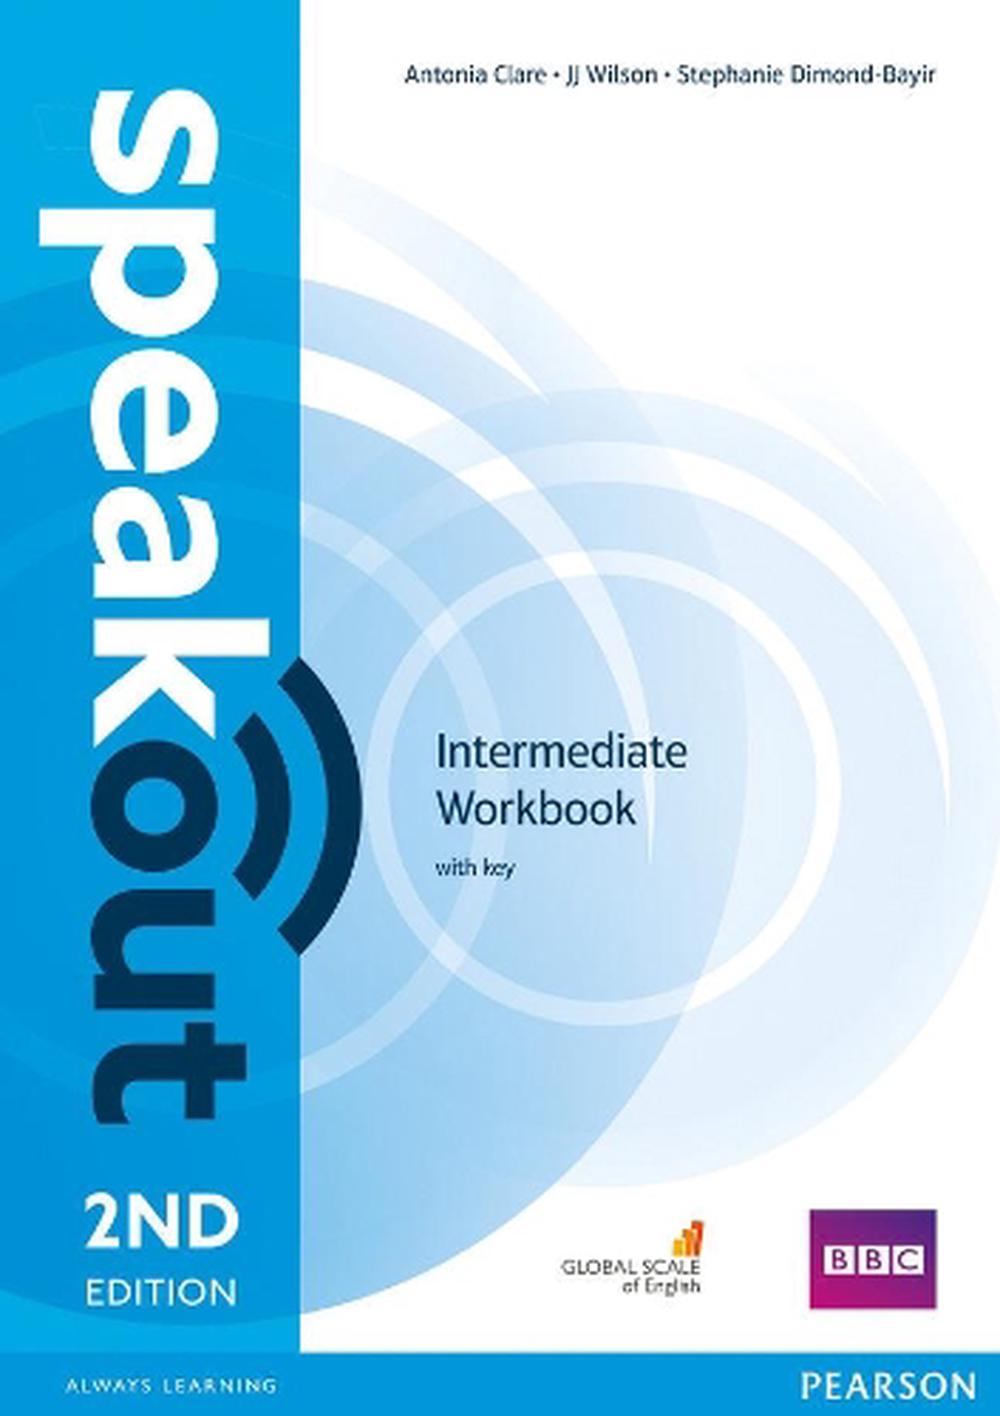 Speakout Upper Intermediate Quick Check Test Speakout Intermediate 2nd Edition Workbook With Key by Stephanie Dimond-bayer (E 9781447976868